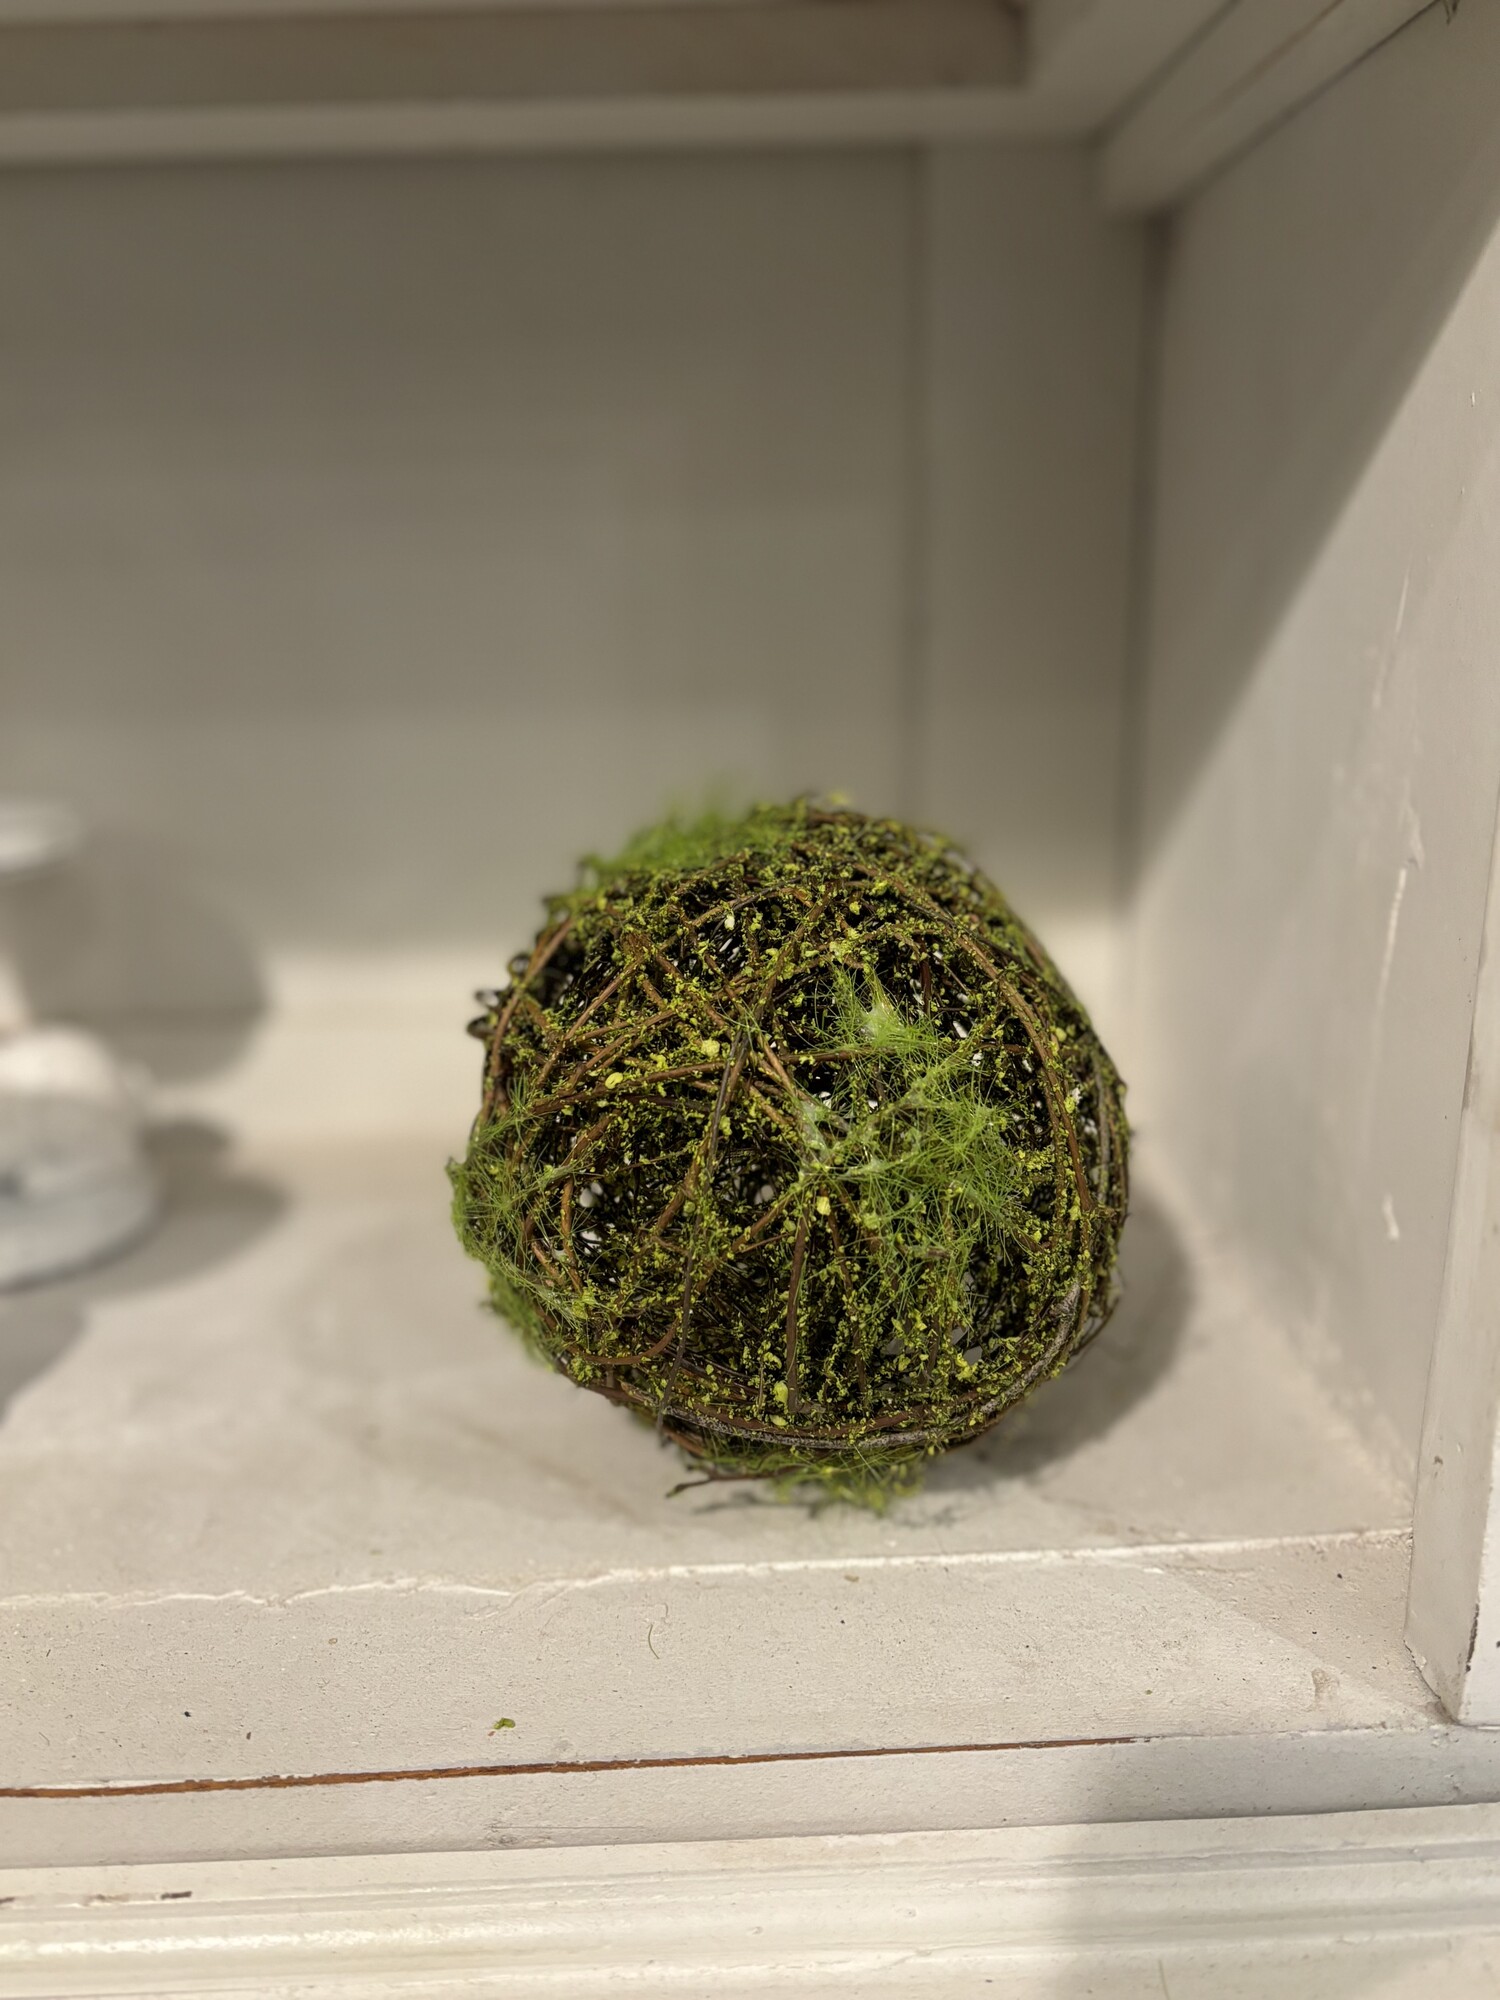 The mossy twig ball is a decorative orb made of natural brown twig material. The sphere is covered in patchy green moss detailing a woodsy look. This ball is perfect for an bowl or tray filler or on top a shelf or stack of books. Measures 5 inches in diameter